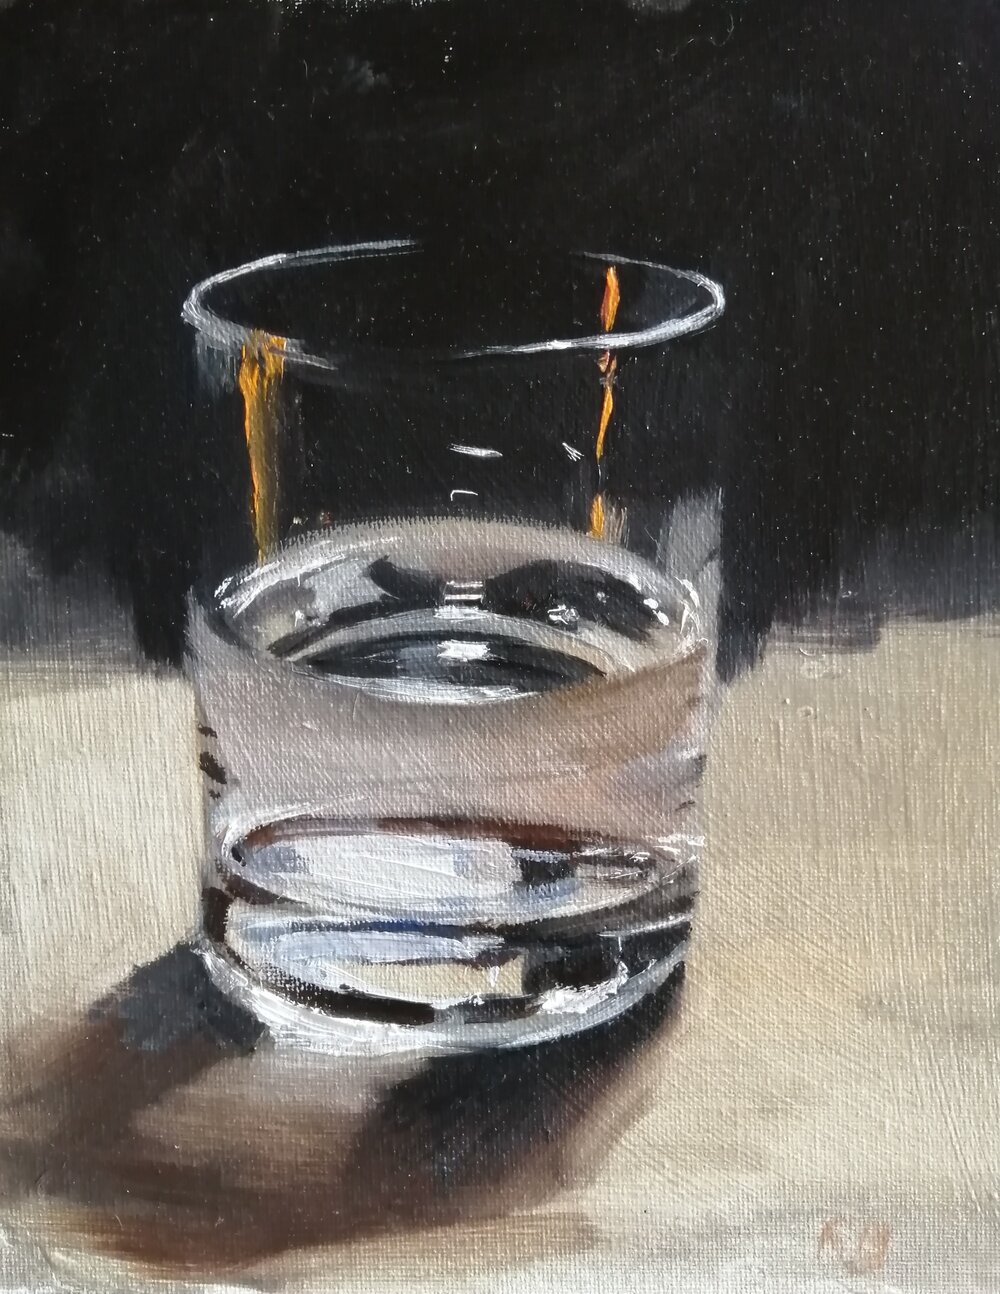  Still water  Oil on board  26x35 cms  SOLD   This still life of a simple glass of water was painted during the turbulent times of the Covid 19 pandemic. The word 'still' in the title carries a double meaning... non sparkling, calm amidst chaos, but 